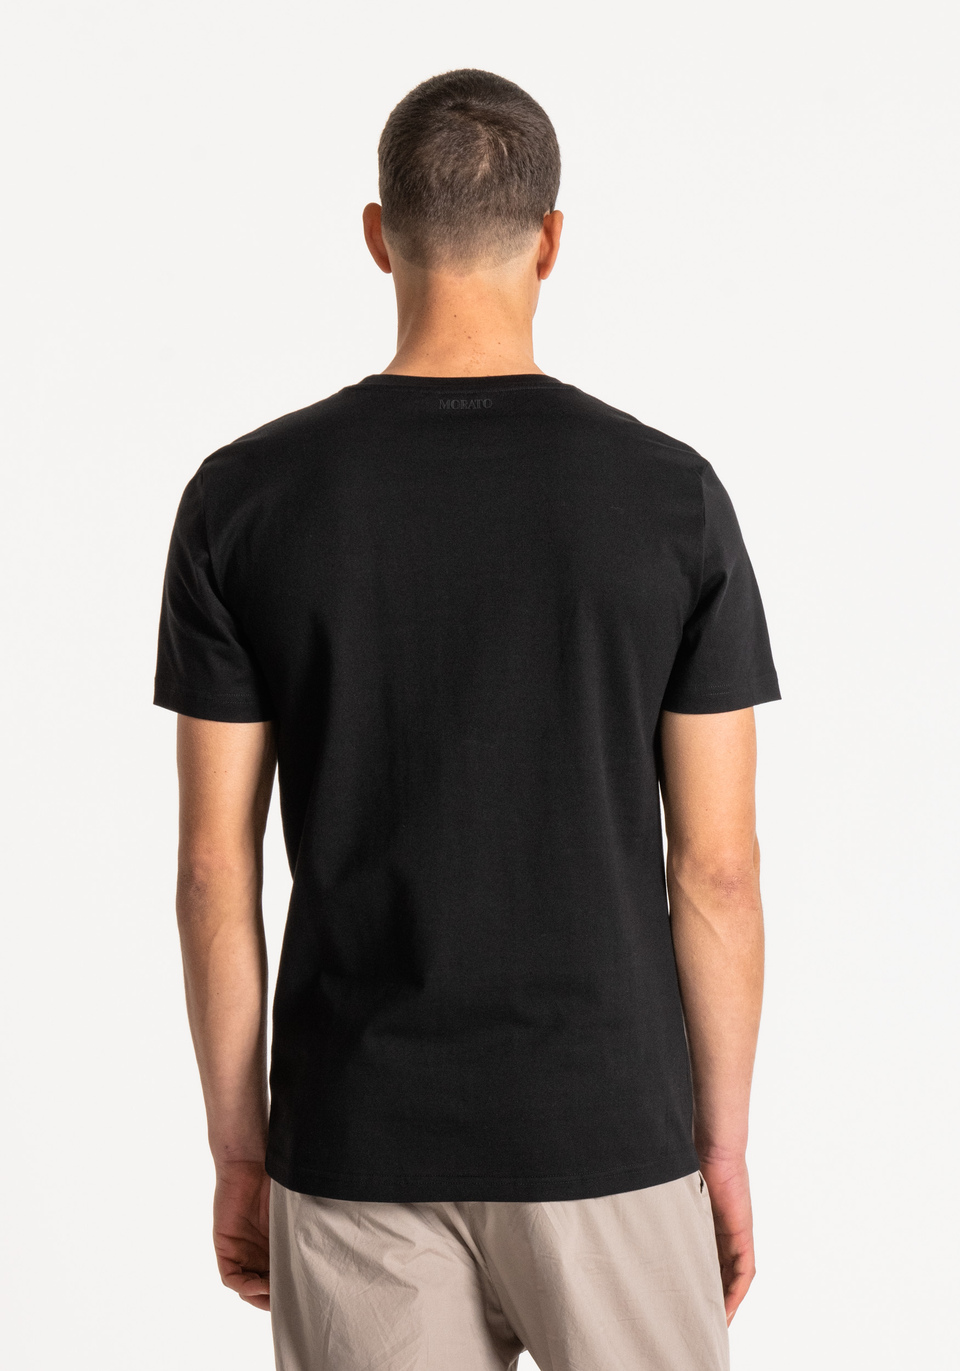 SLIM-FIT T-SHIRT IN 100% COTTON WITH PALM-TREE PRINT - Antony Morato Online Shop